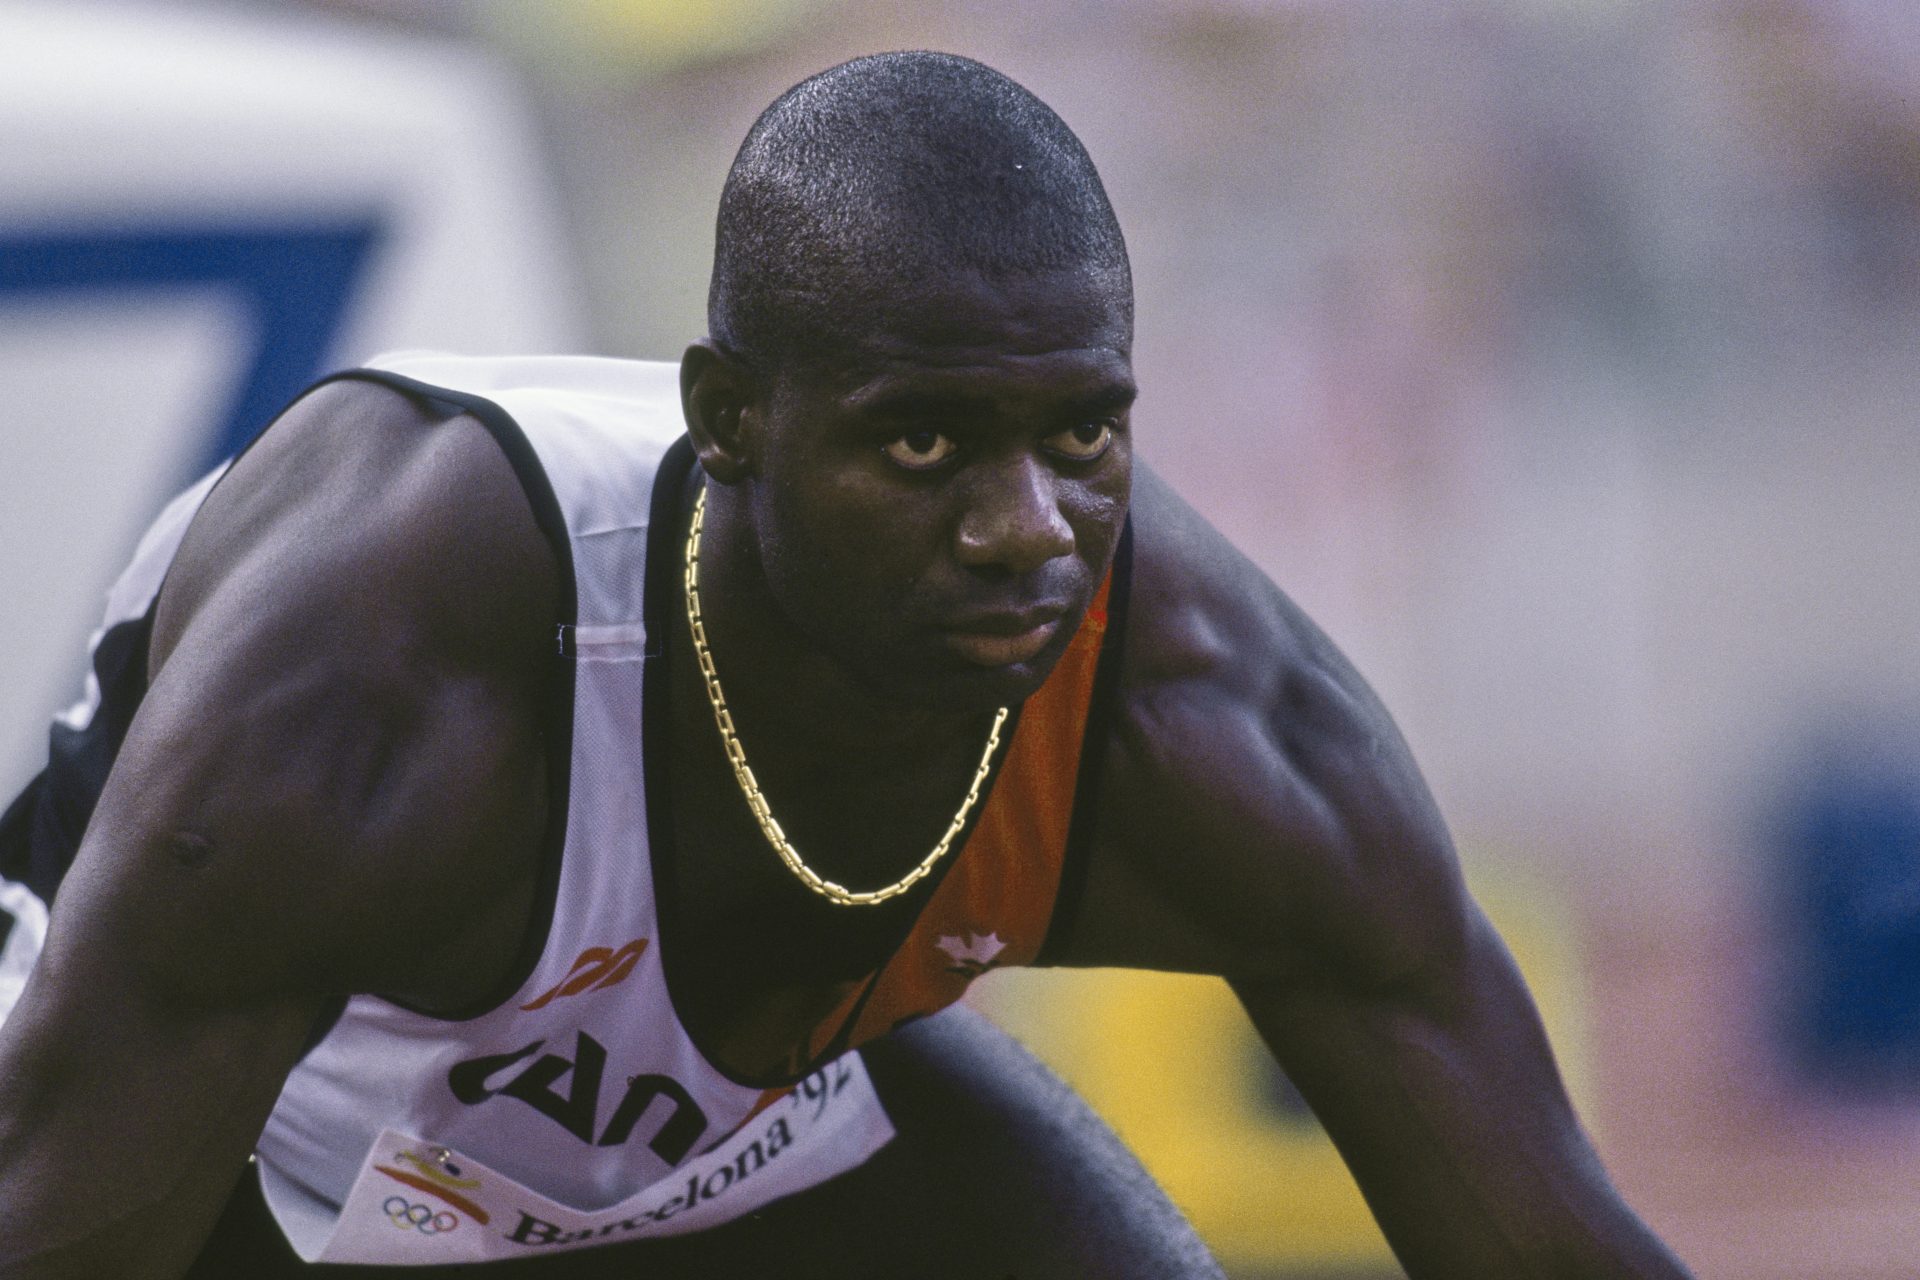 Ben Johnson: The Olympic hero who became a disgraced drug cheat